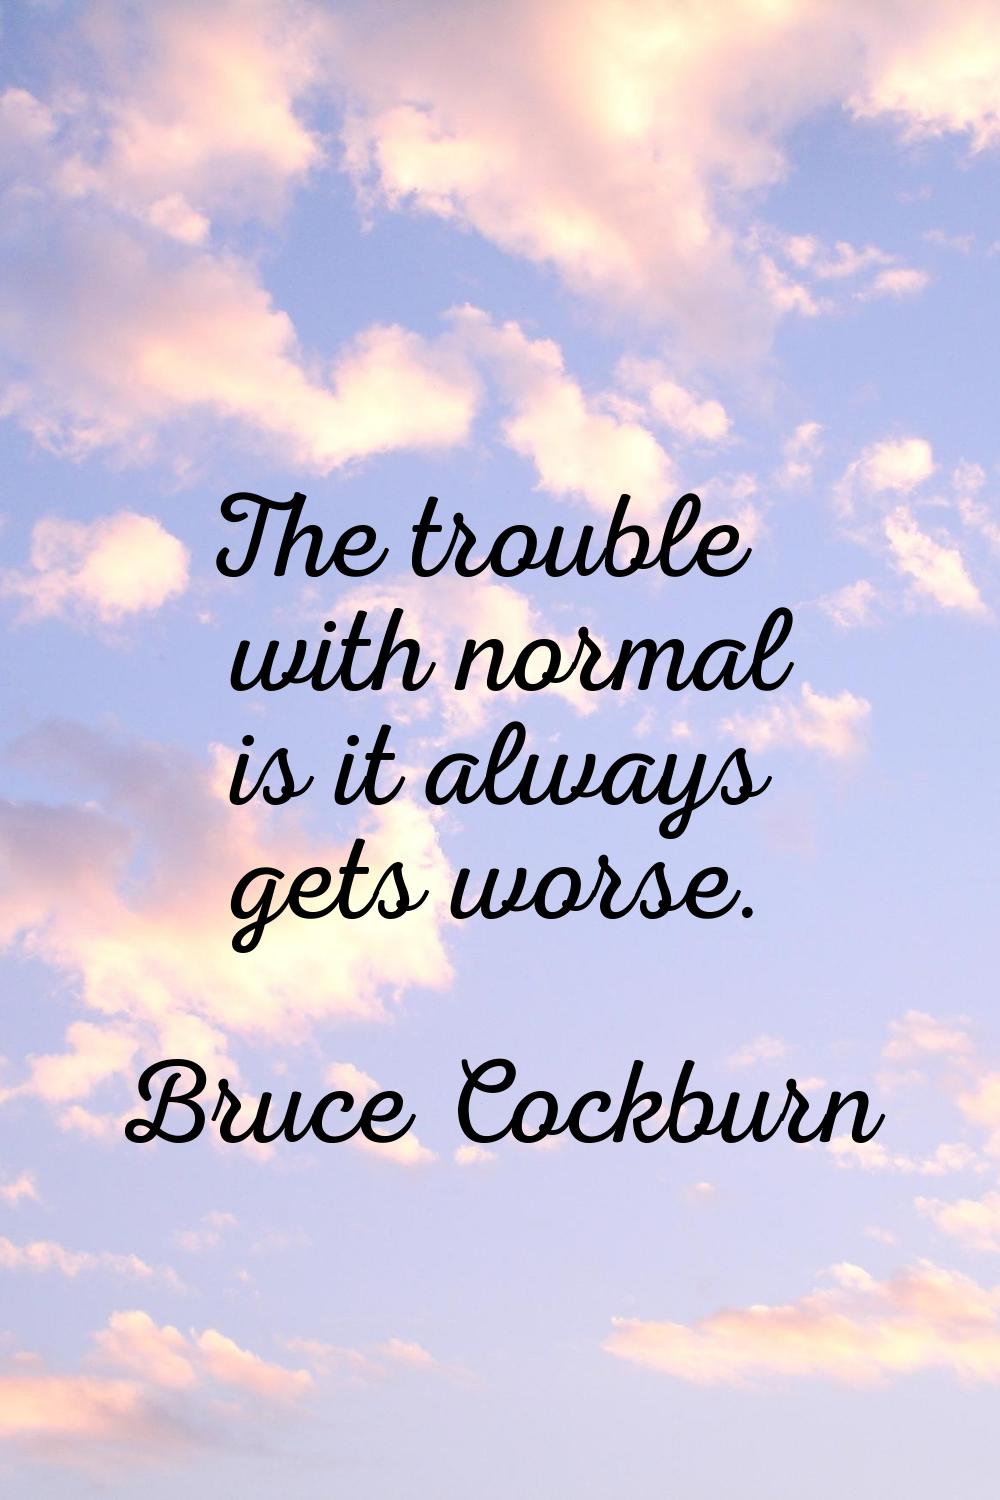 The trouble with normal is it always gets worse.